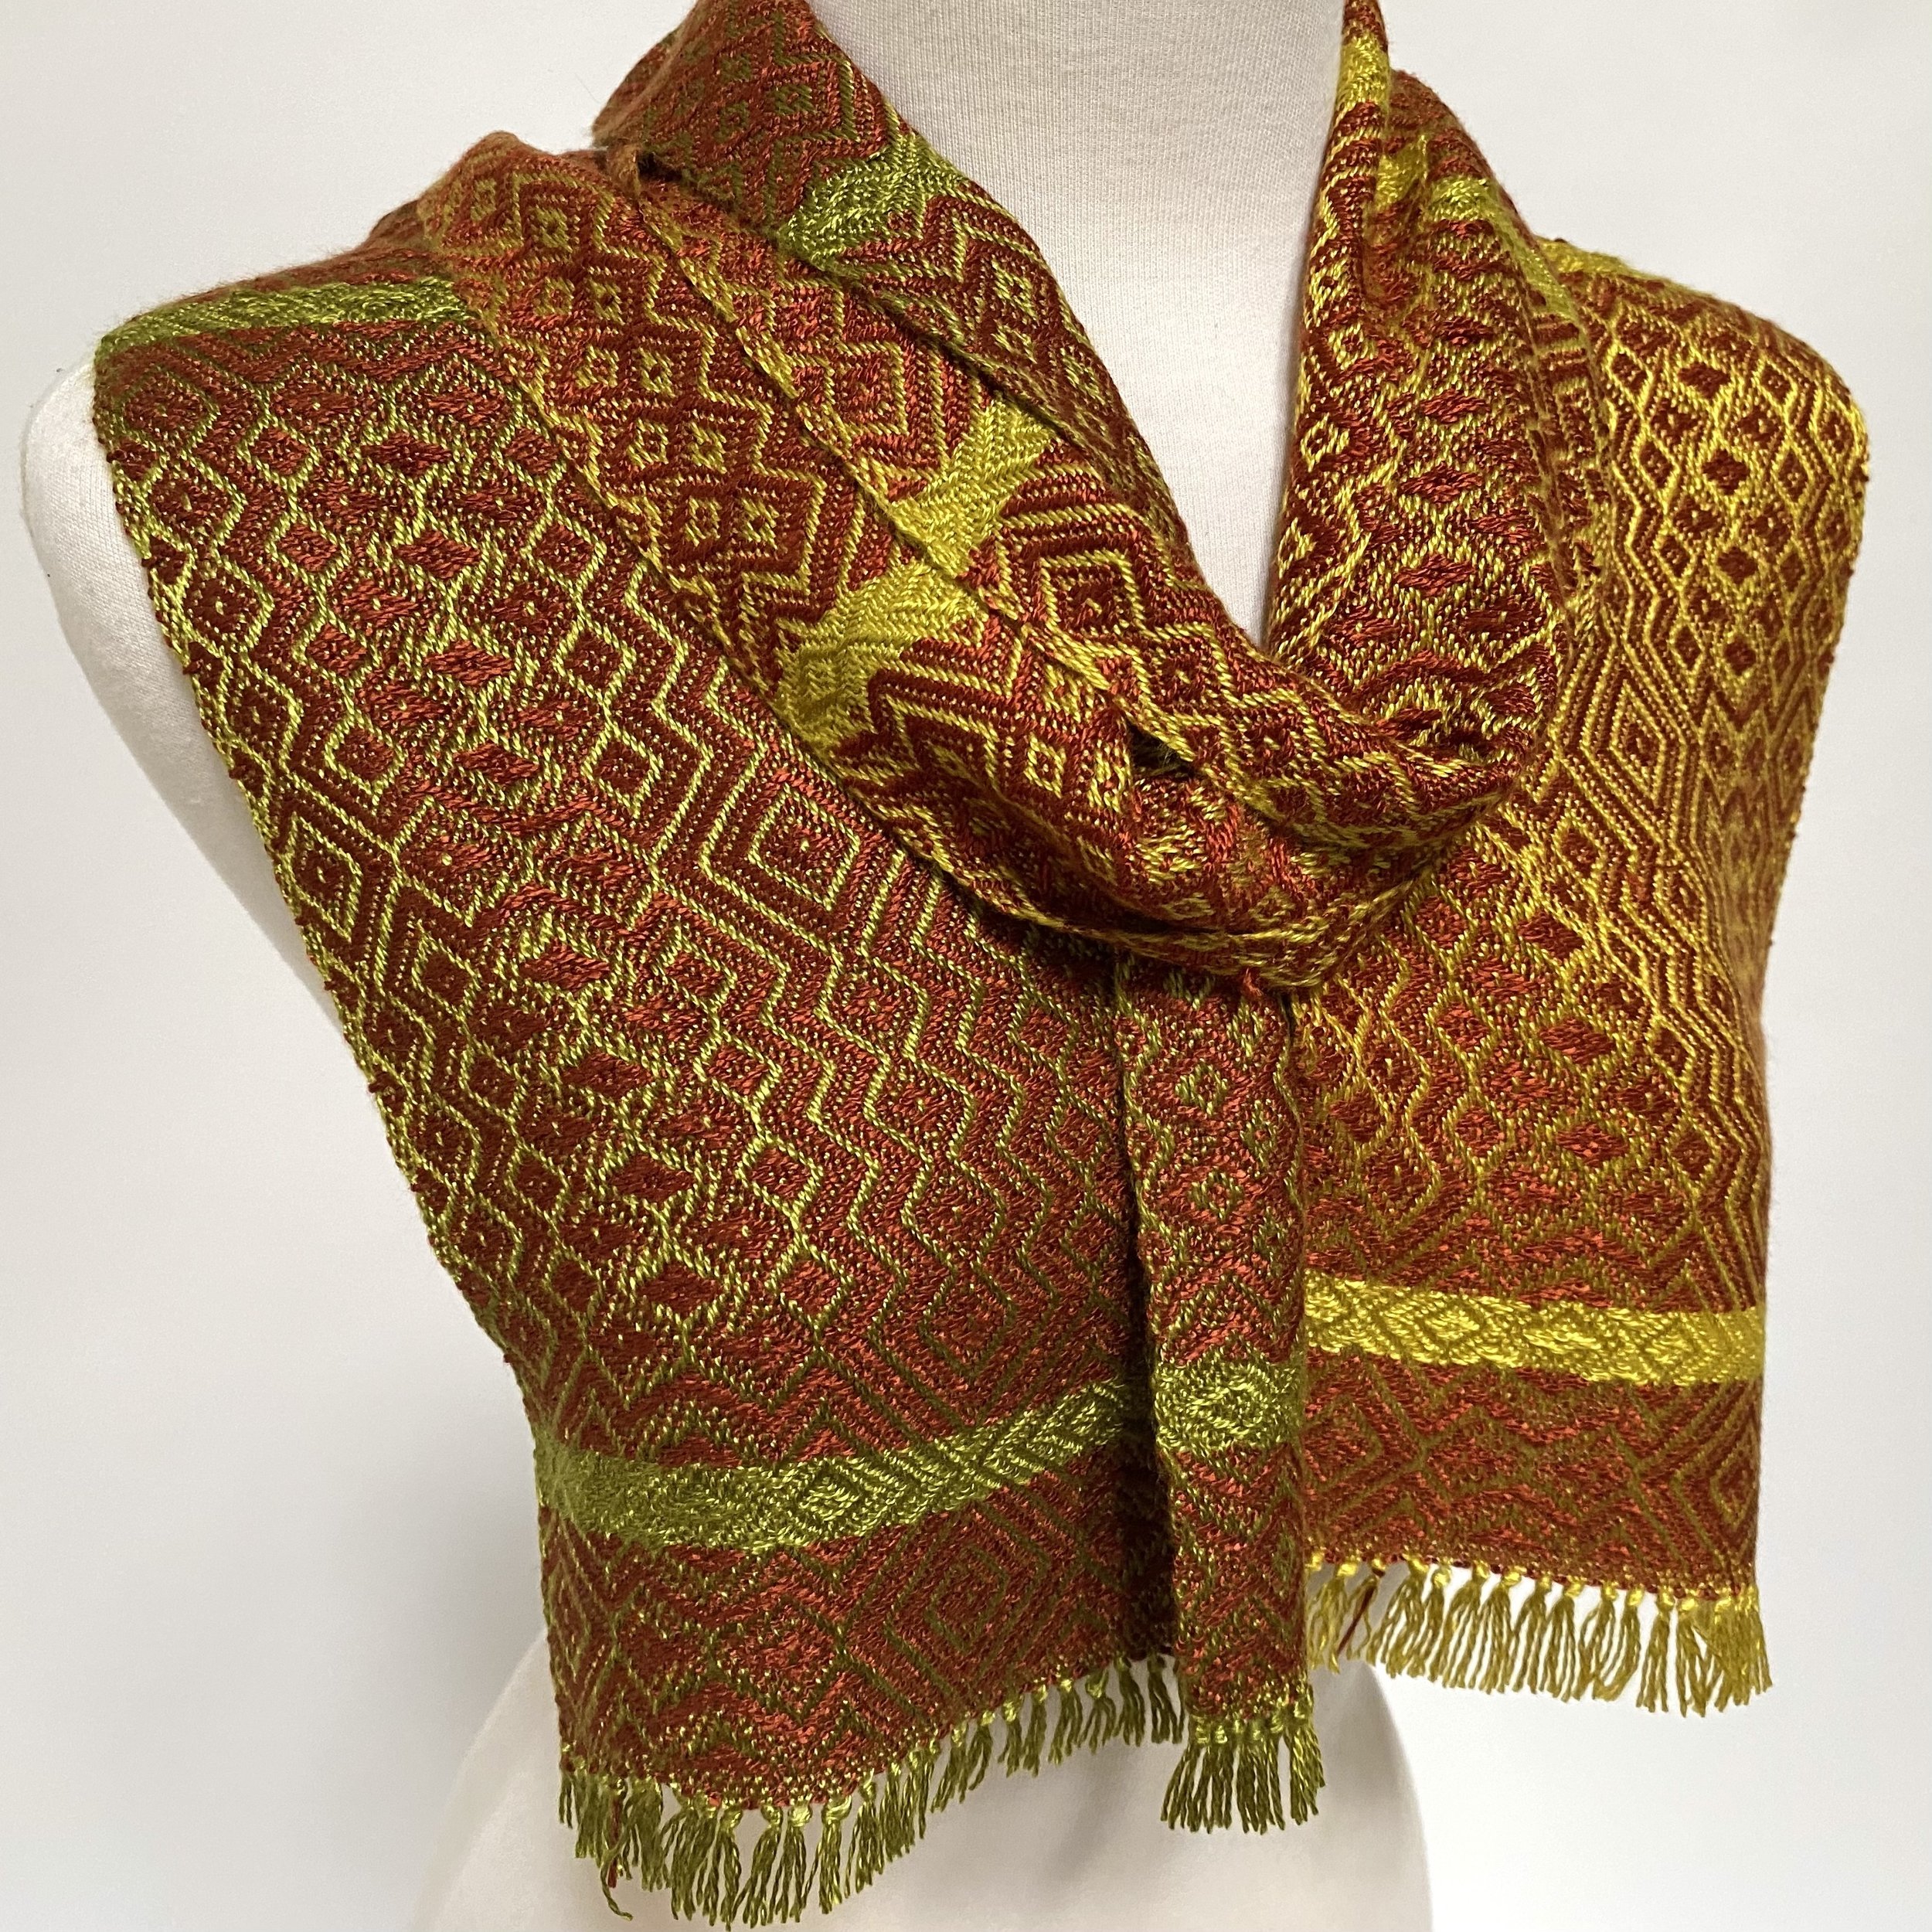   Autumn Inspiration Handwoven Scarf 2     For more details by clicking on this link.   